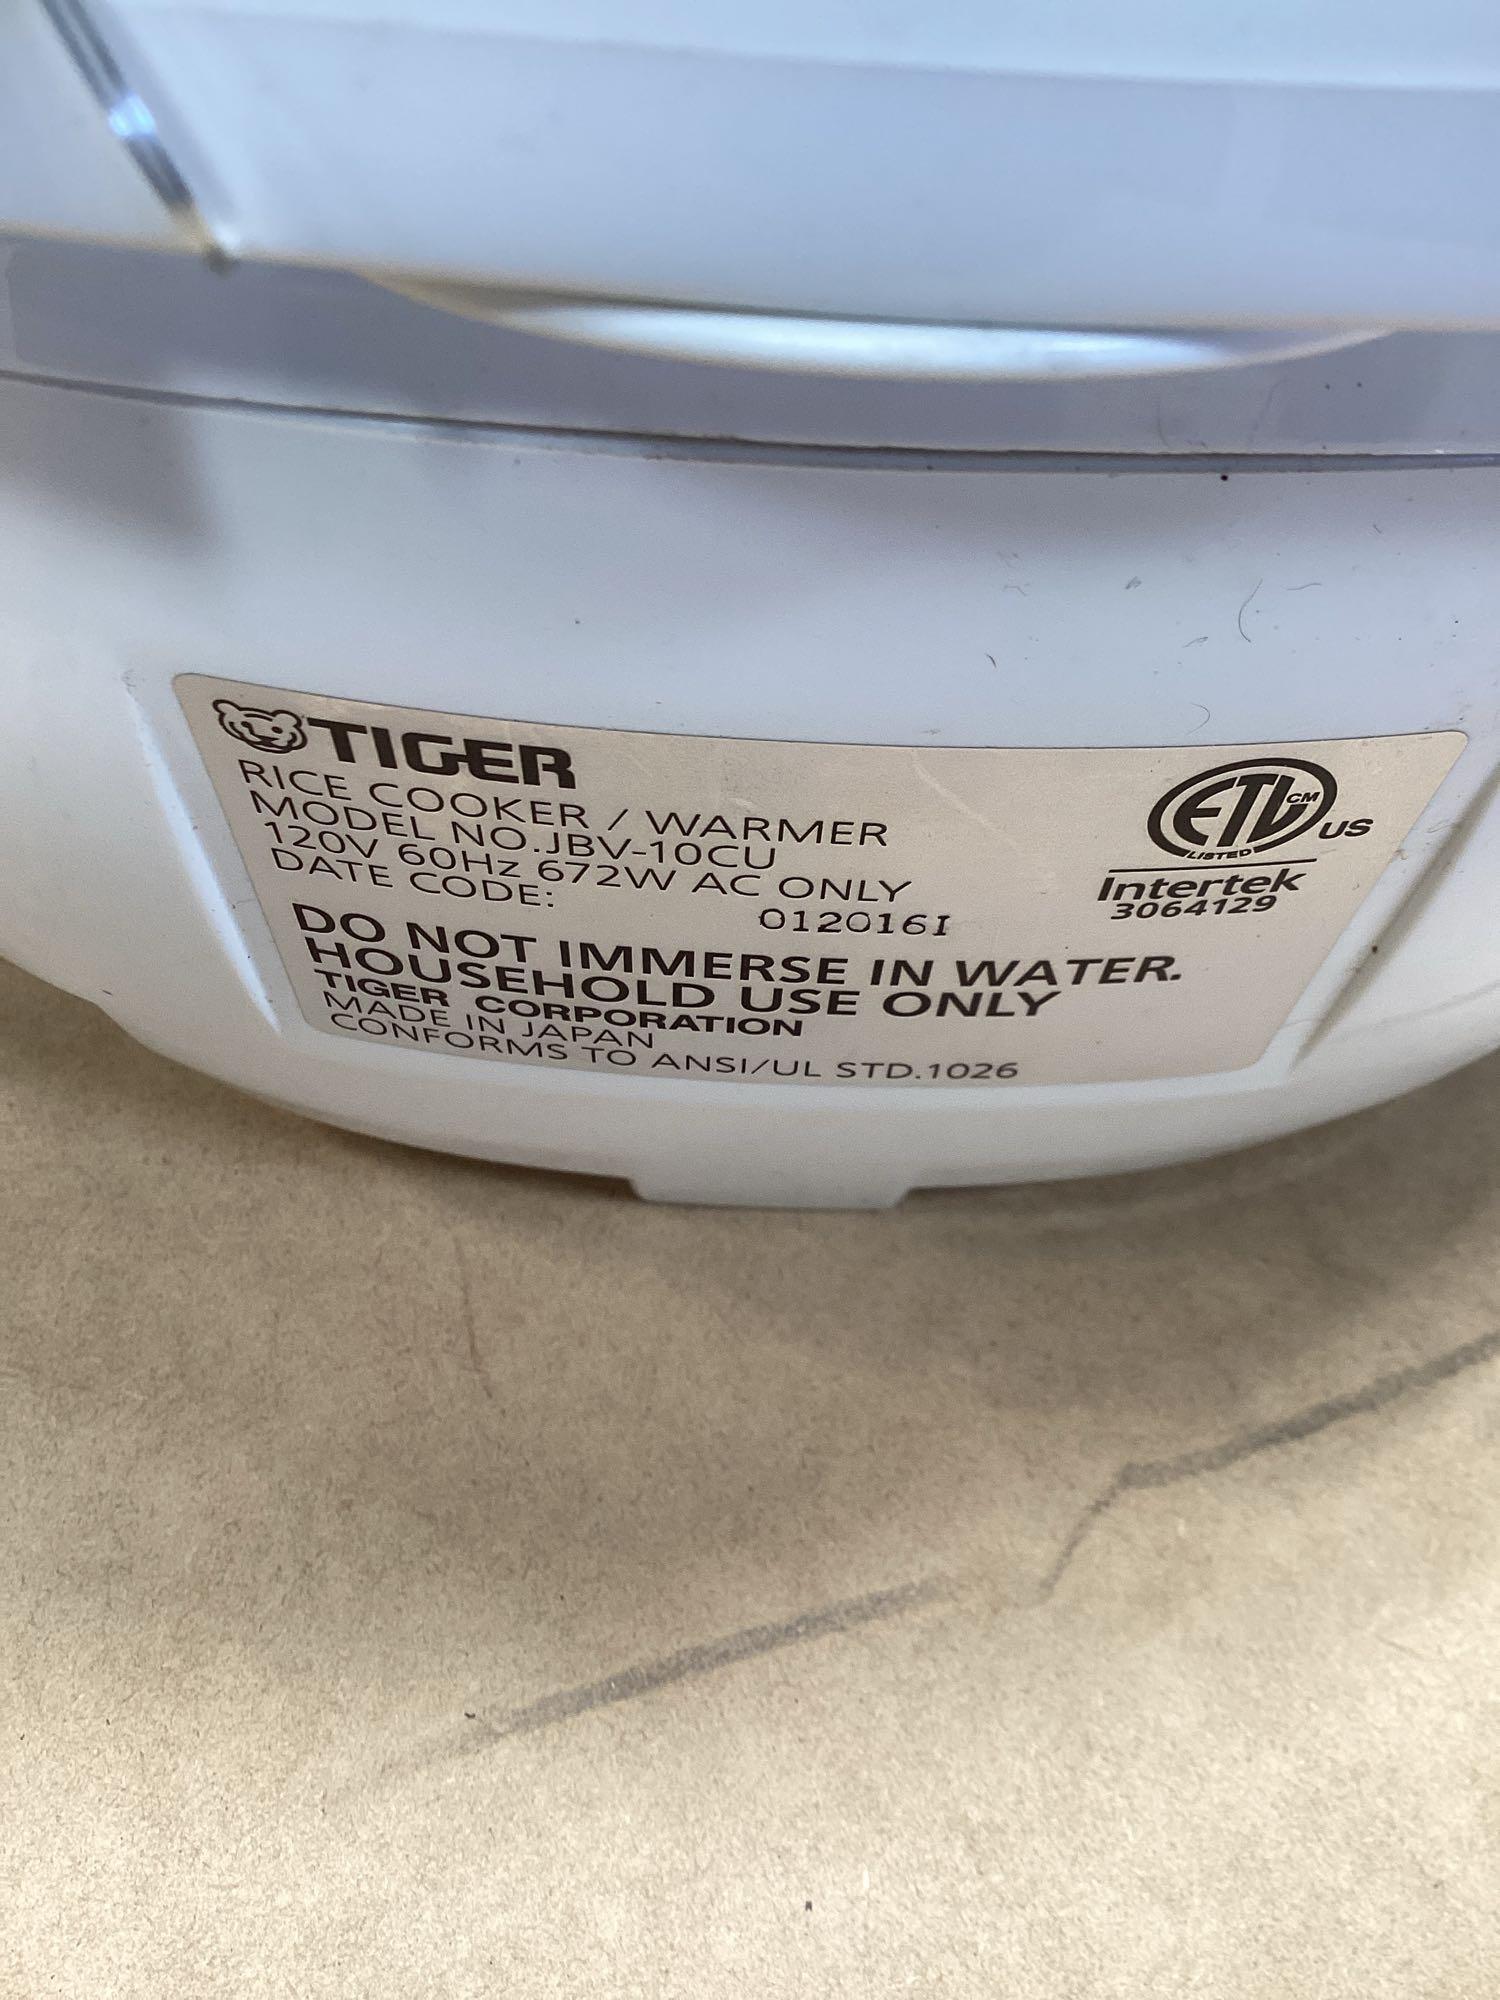 Lot of (2) Tiger Rice Cooker and Warmer